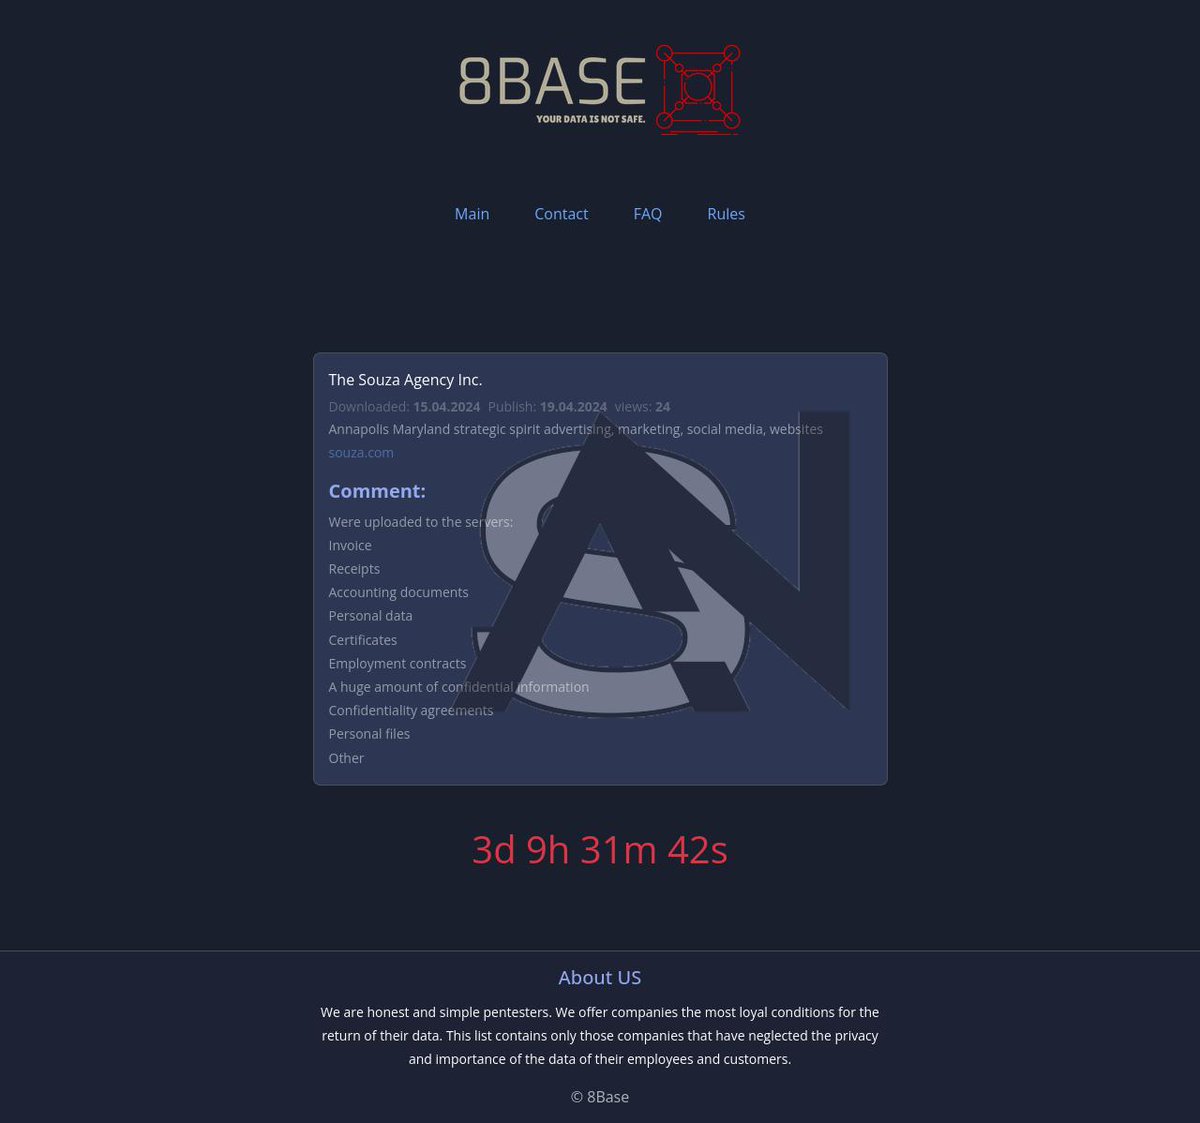 ⚠️Ransomware Alert🚨: The Souza Agency Inc. Has Been Targeted By 8base 
Date:2024-04-15
 
 #DailyThreatUpdates #DailyThreatIntel #Ransomware #DarkWeb #ransomwarealerts #Intel